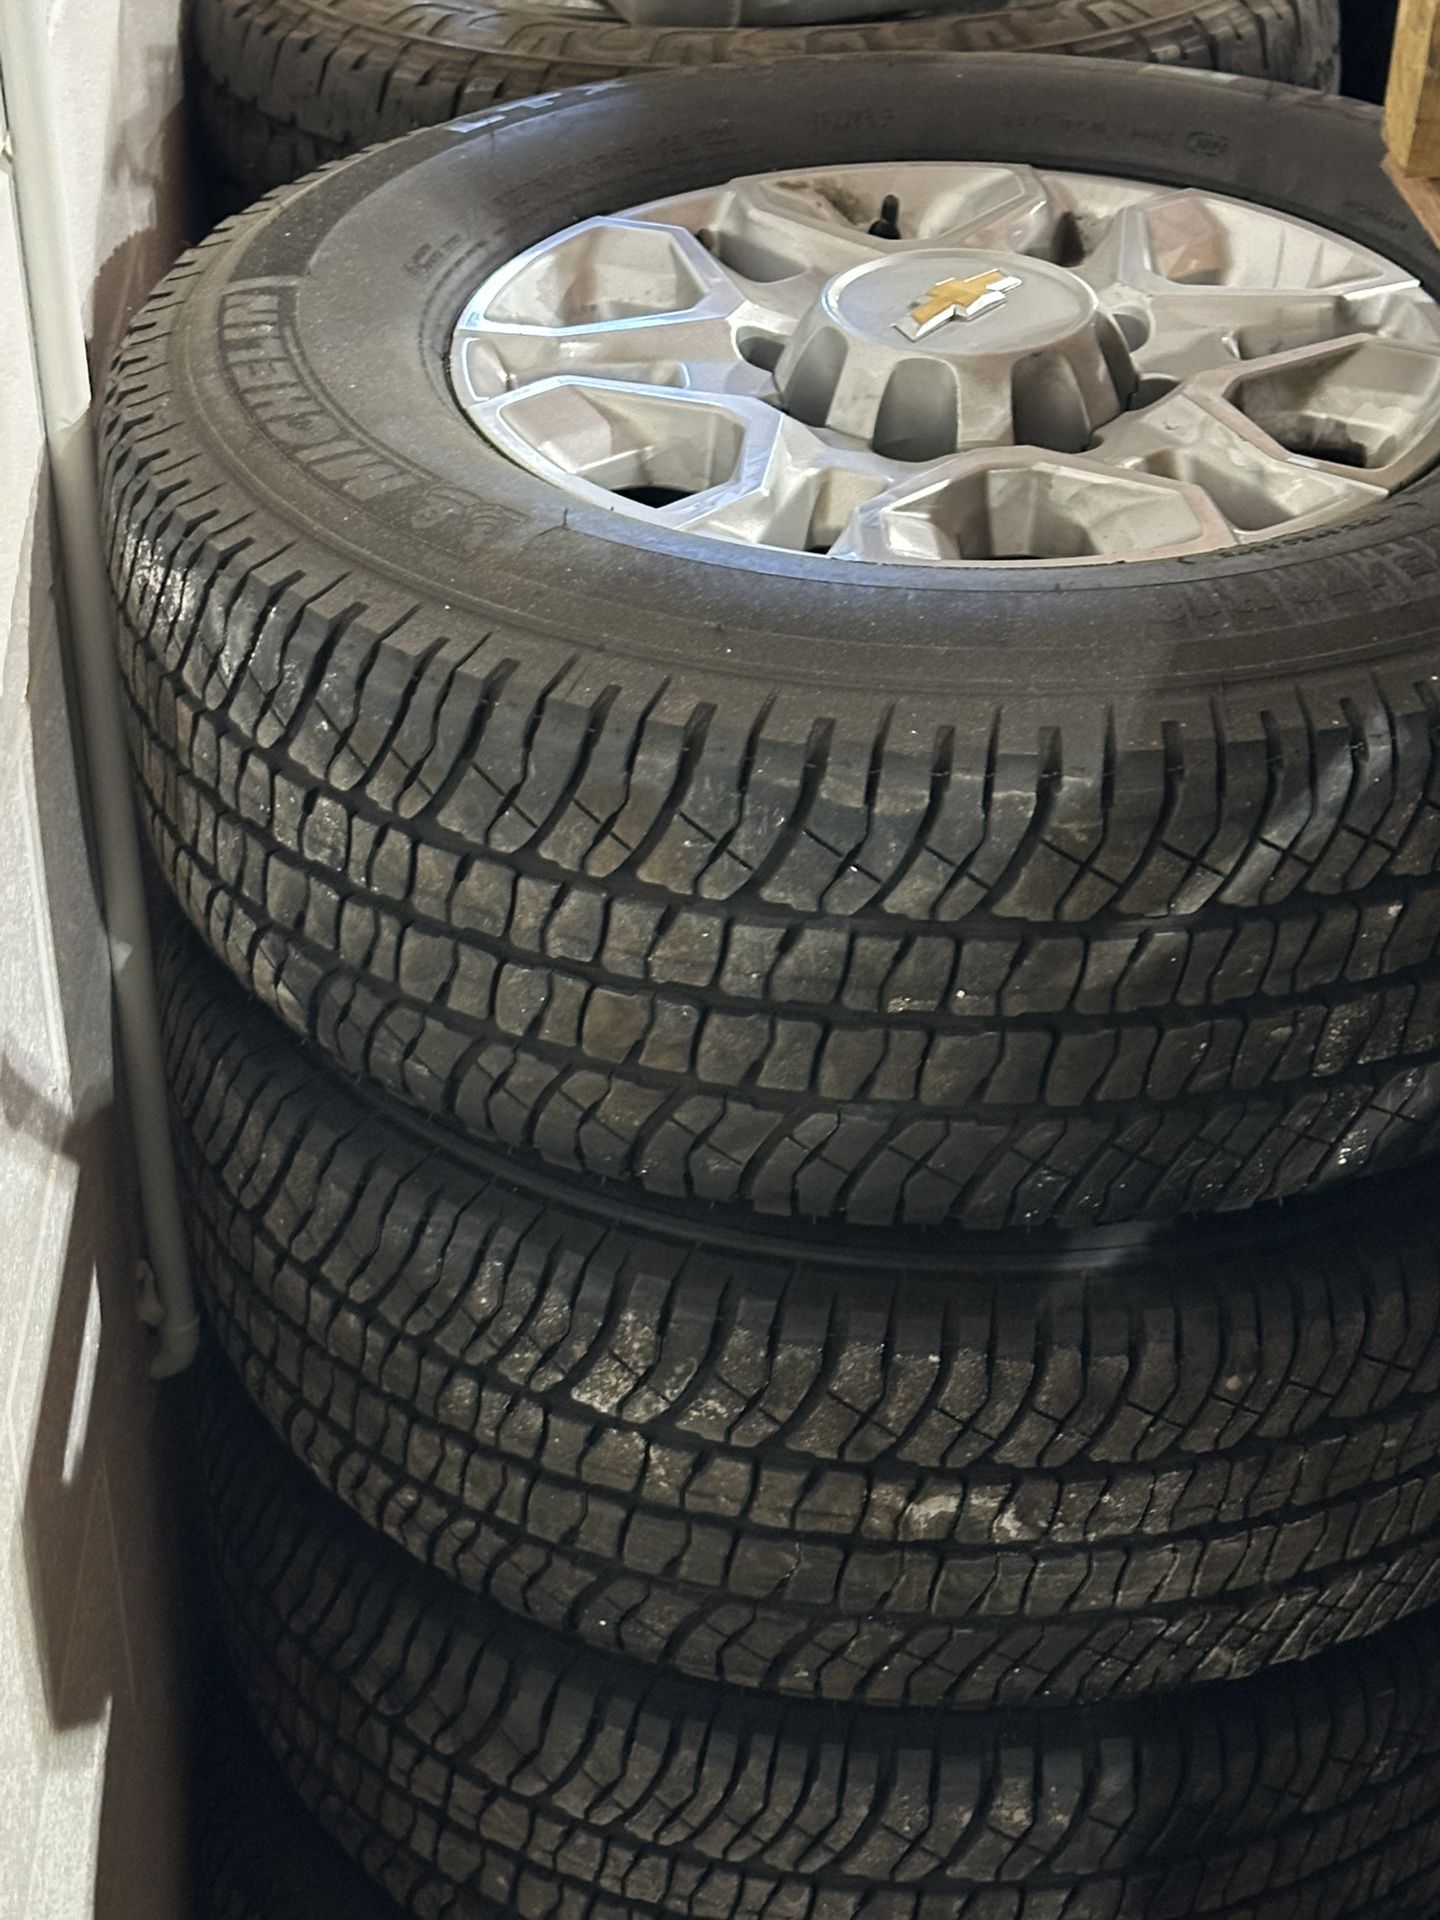 Two sets of 2021 And Up Chevy Duramax Wheels With Michelin LTX